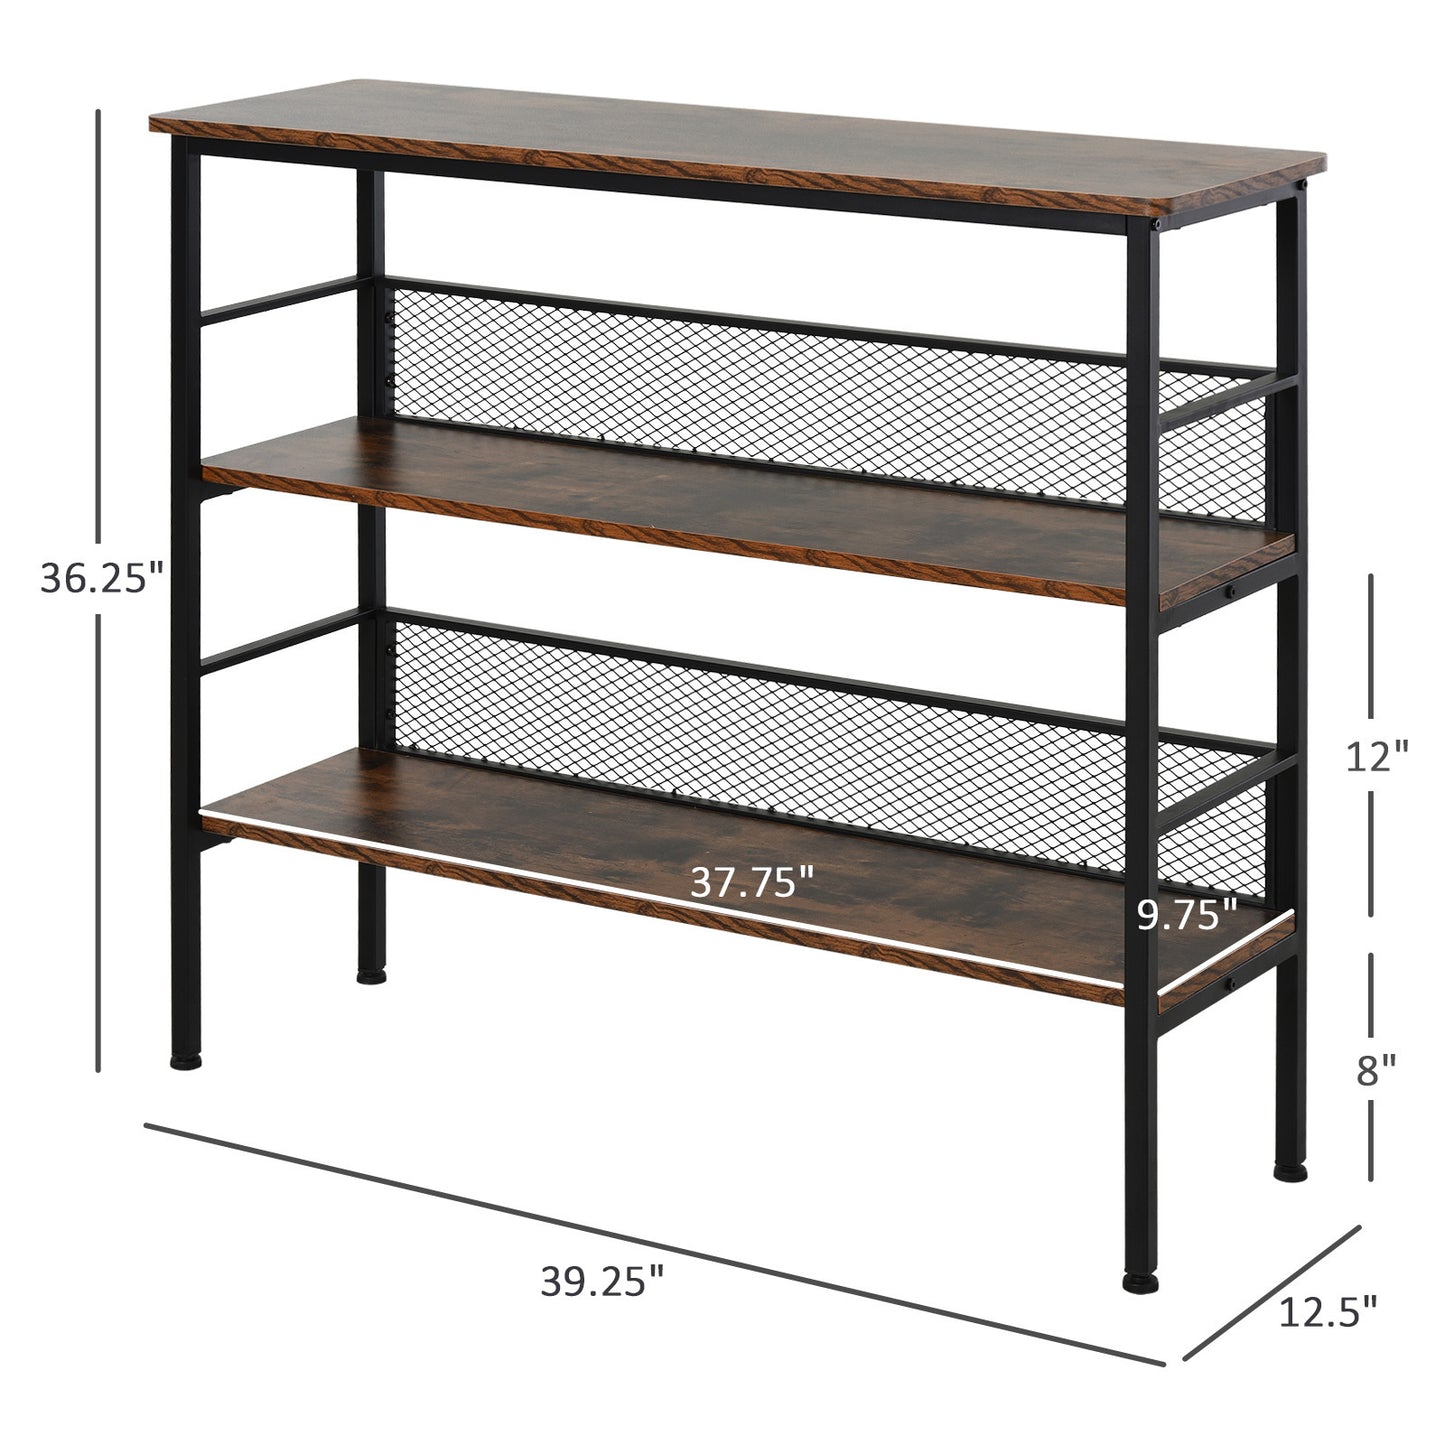 3-Tier Console Table Industrial Style Storage Metal Wooden Shelf with a Robust Multi-Functional Design & Adjustable Feet, Black